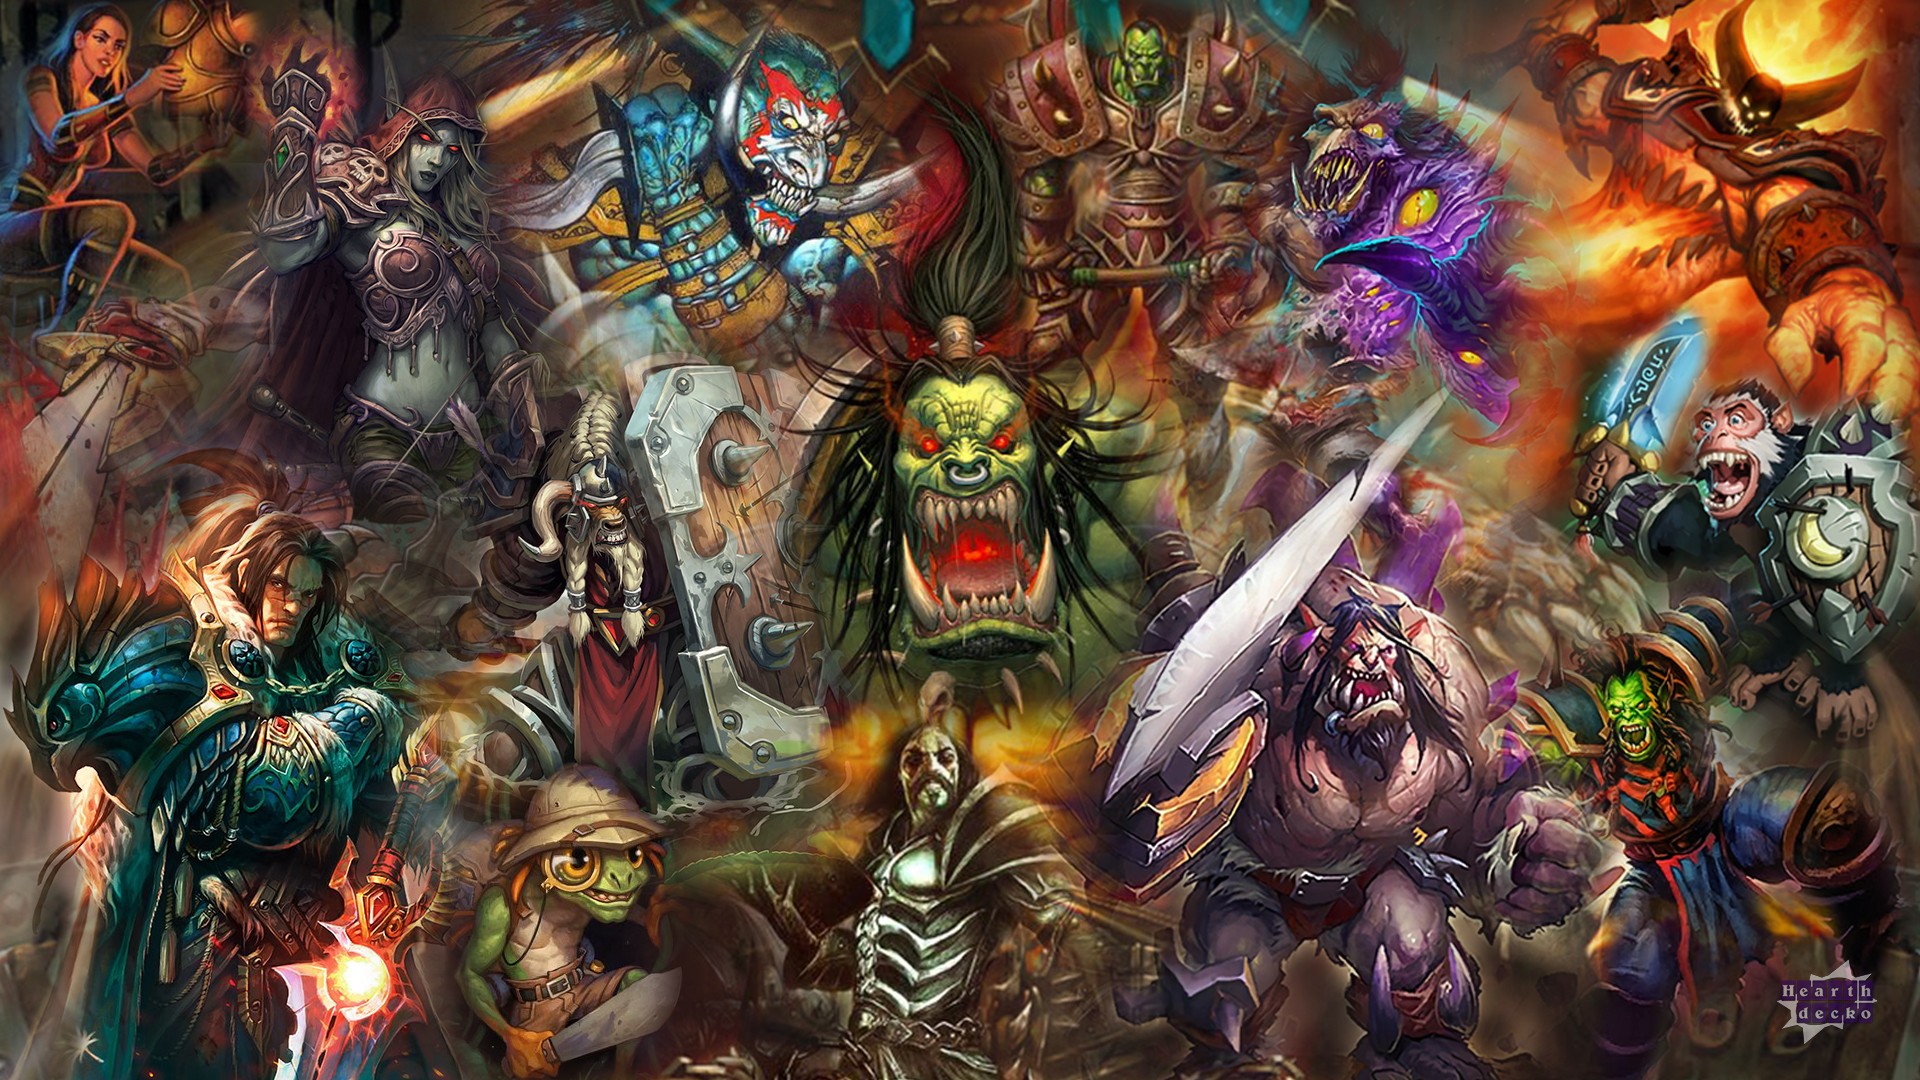 iphone xs hearthstone background